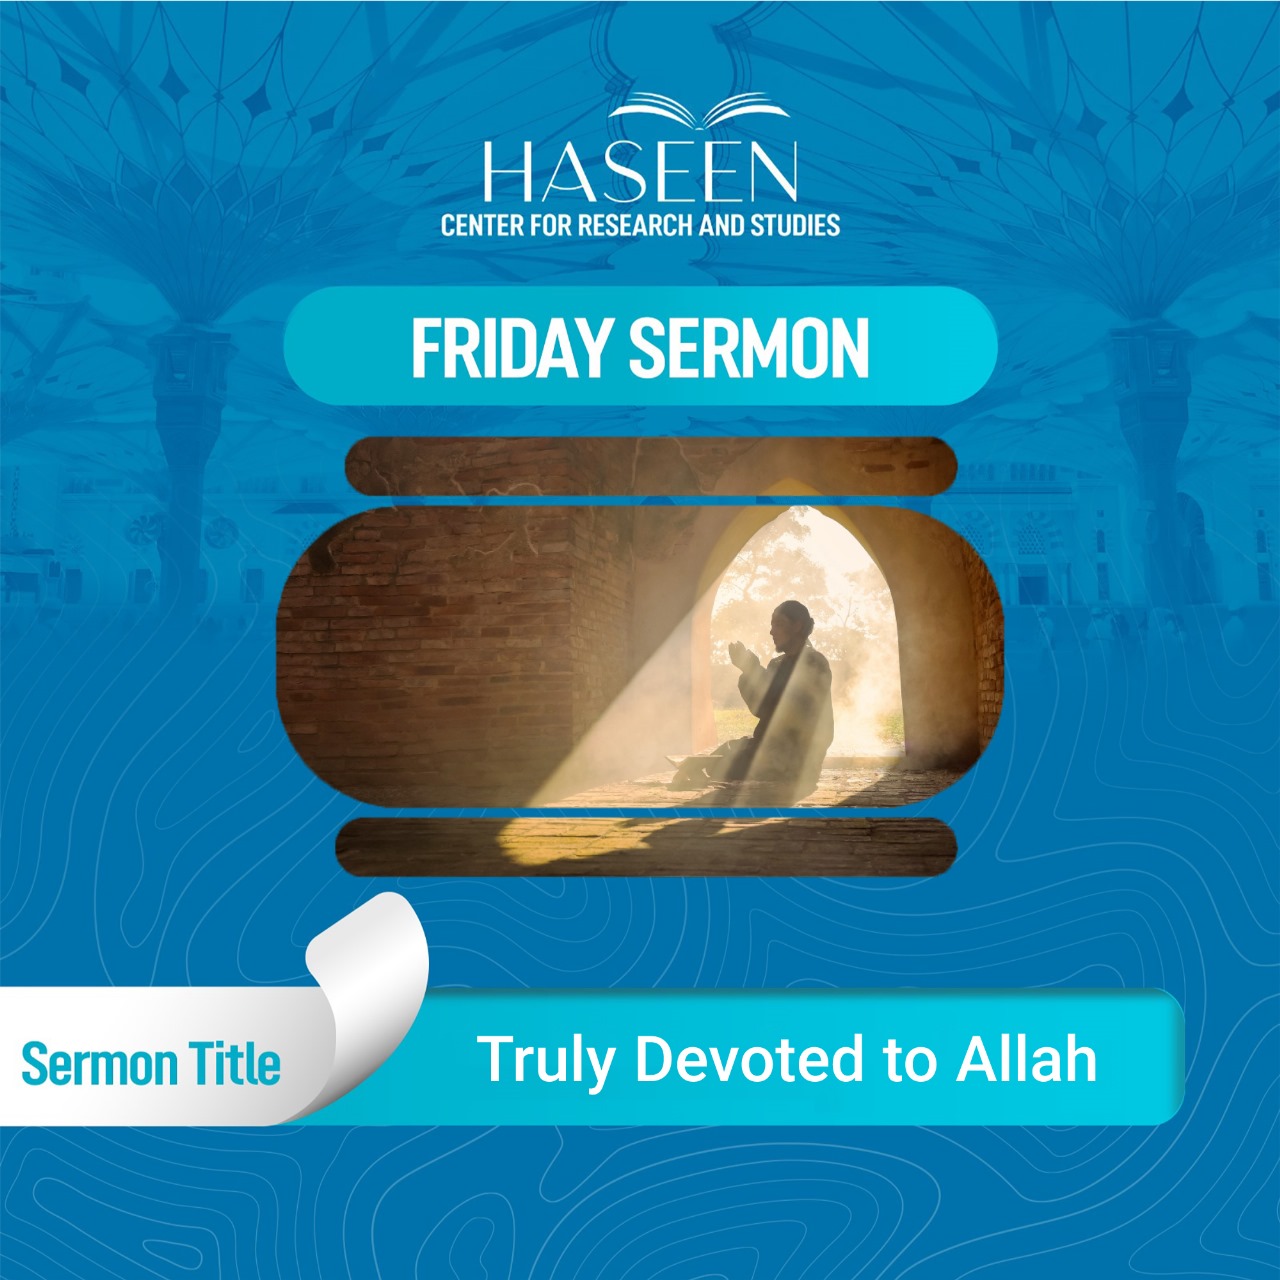 Title of the Sermon: Truly Devoted to Allah